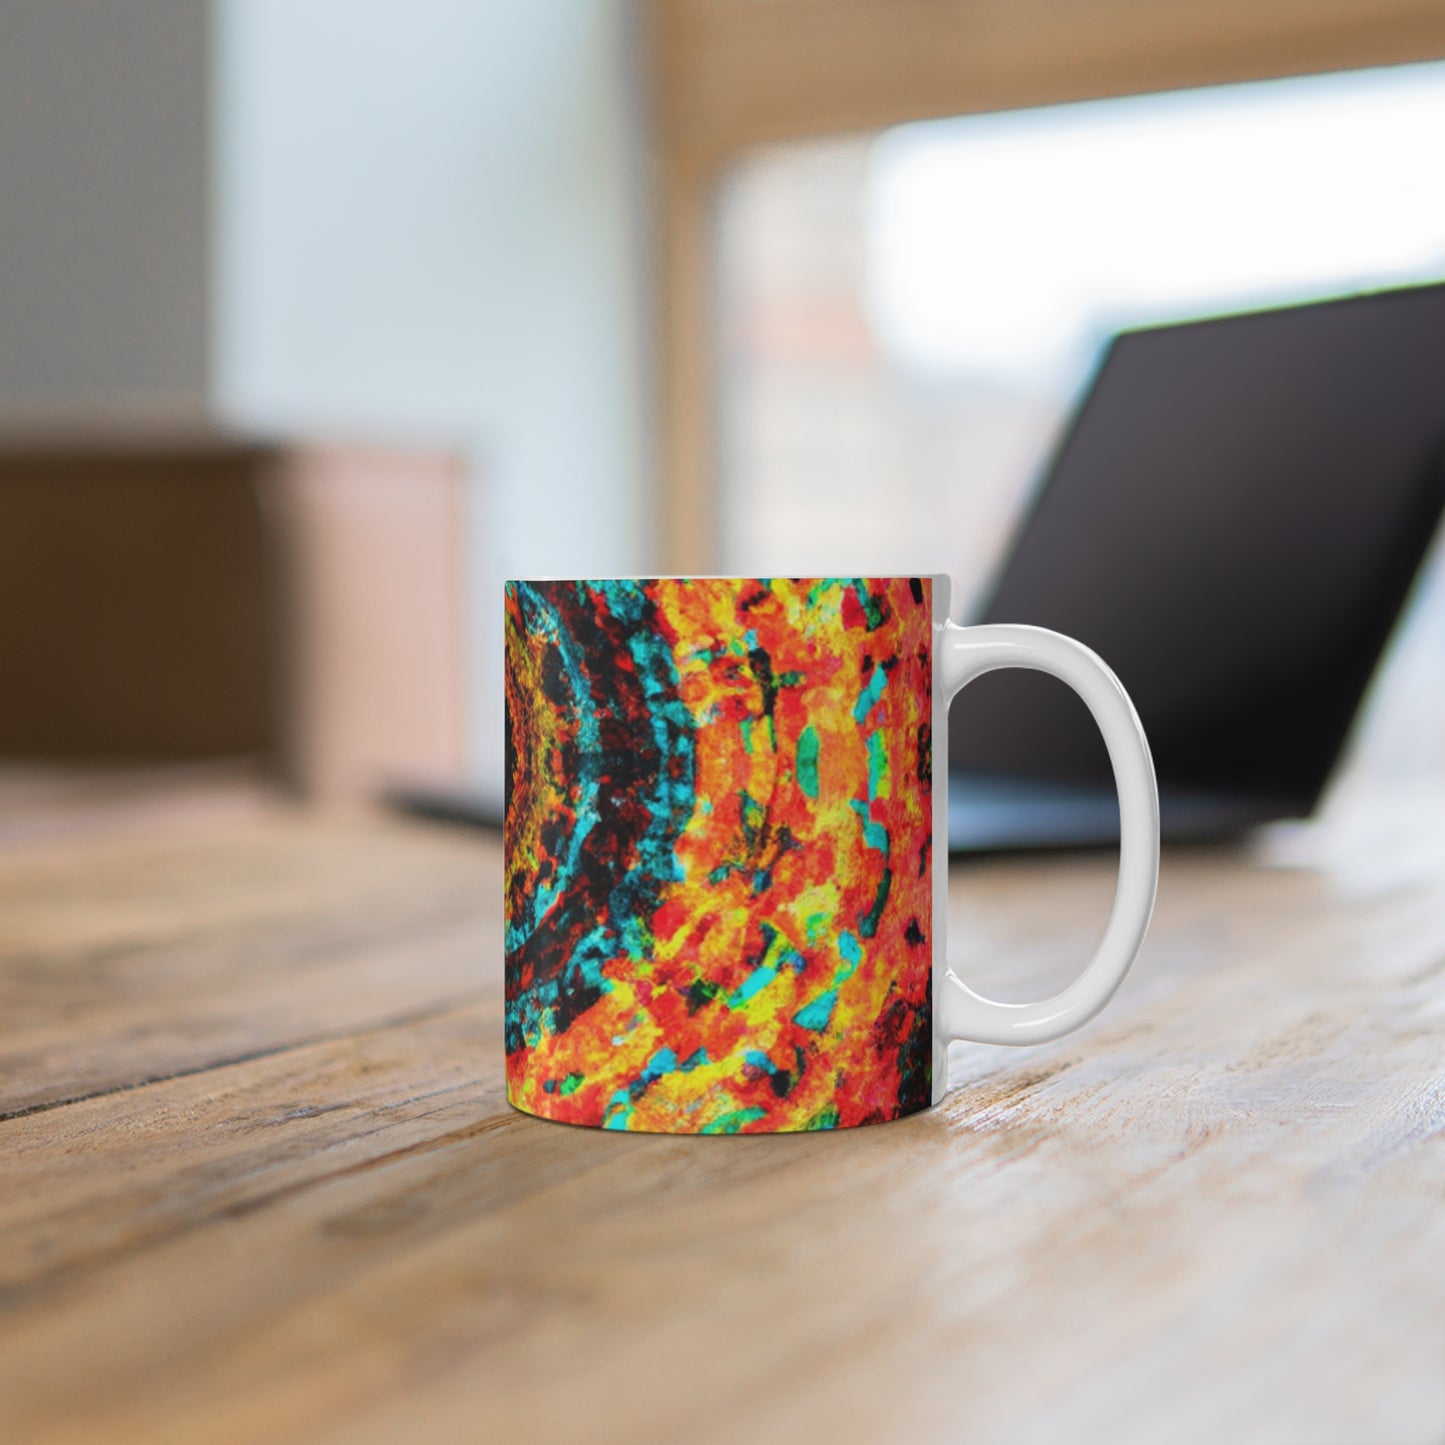 Aurora's Coffee Roasters - Psychedelic Coffee Cup Mug 11 Ounce